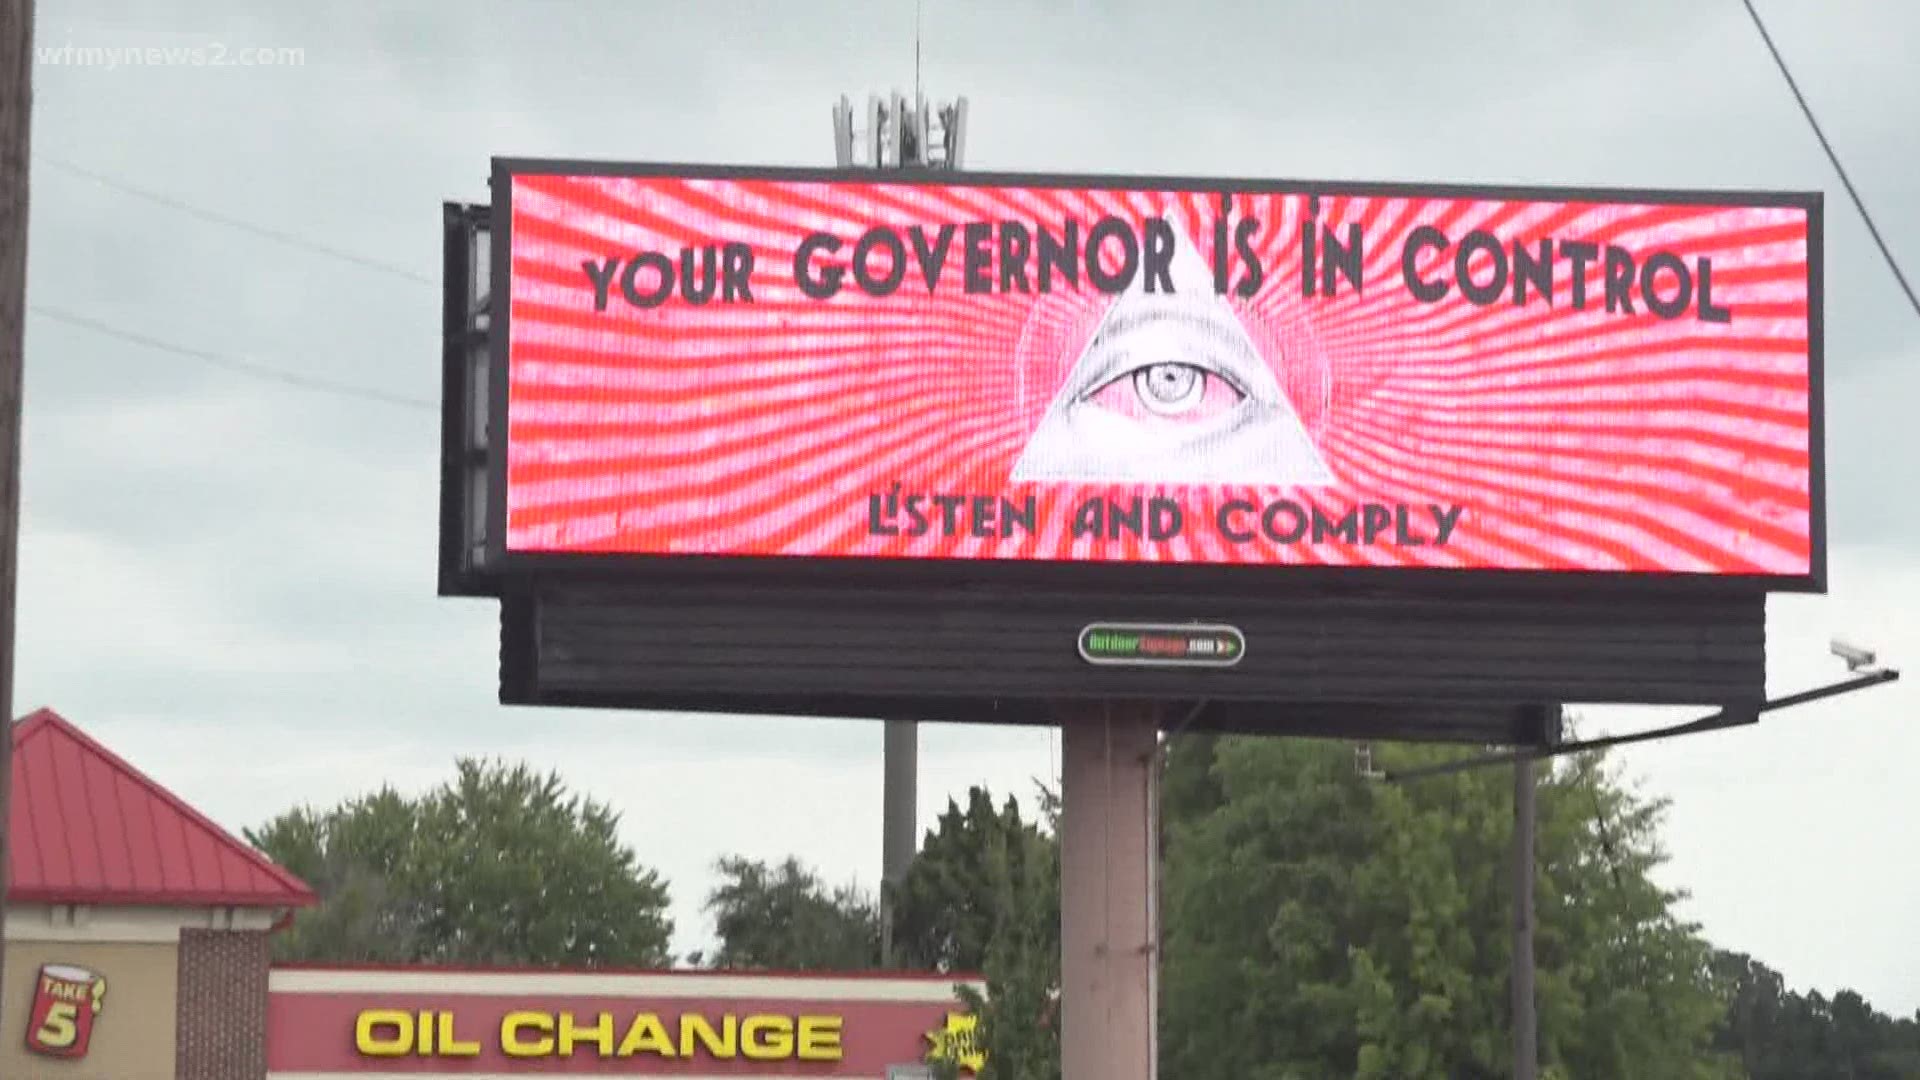 Marty Kotis put up a billboard saying things like "Follow the Order" and "Your Governor is in Control".